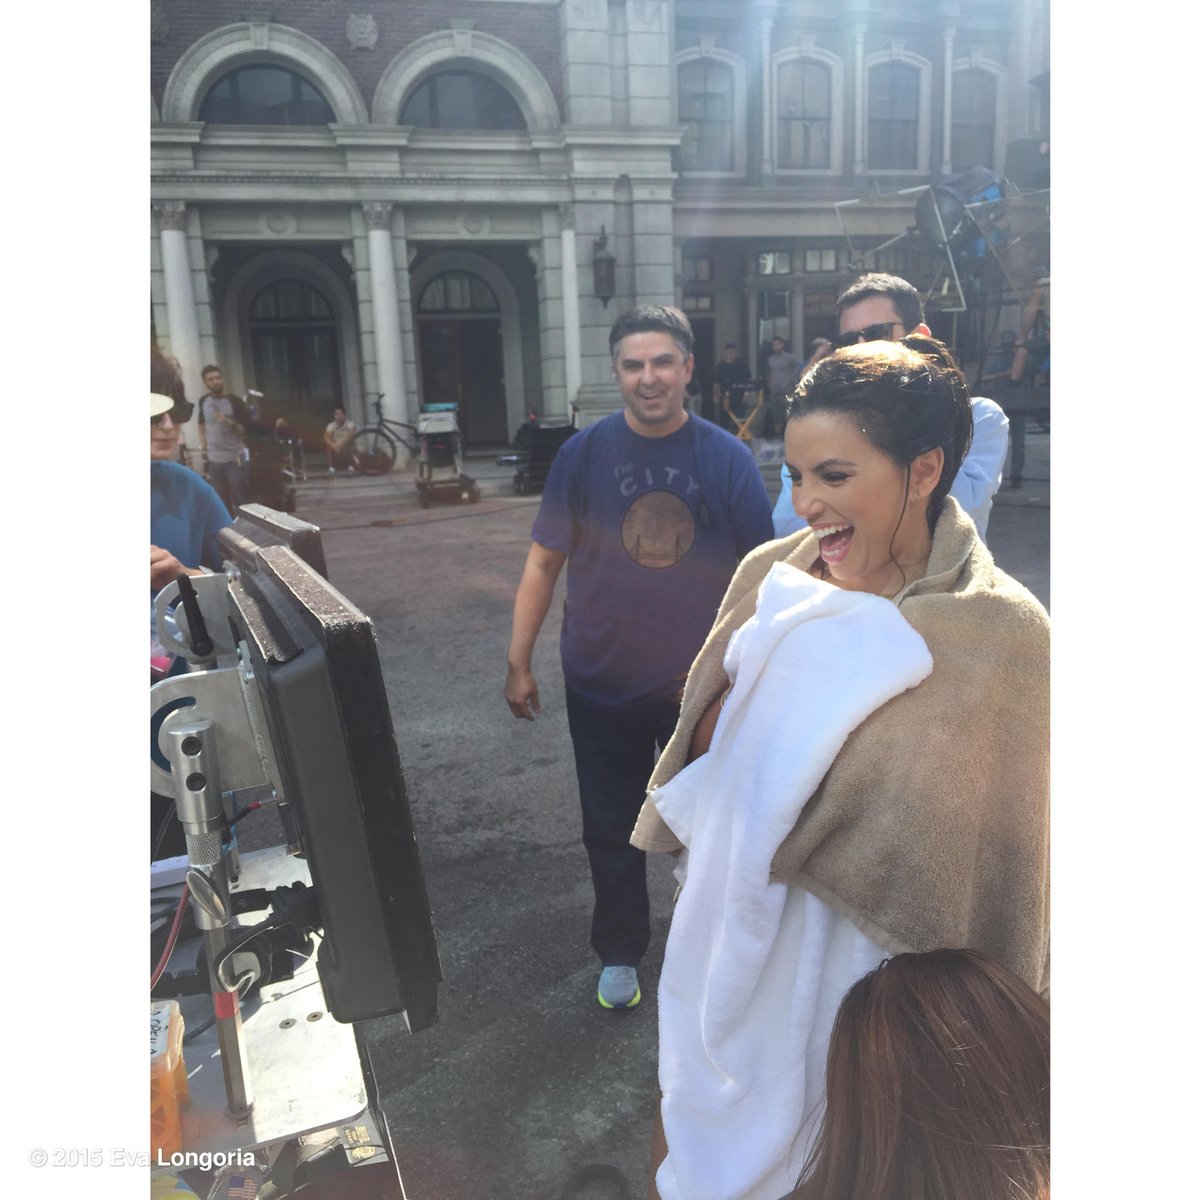 Yesterday directing in a bathing suit, today directing soaking wet! Follow on snapchat (@realevalongoria) #Telenova https://t.co/sd4UgZQOcA